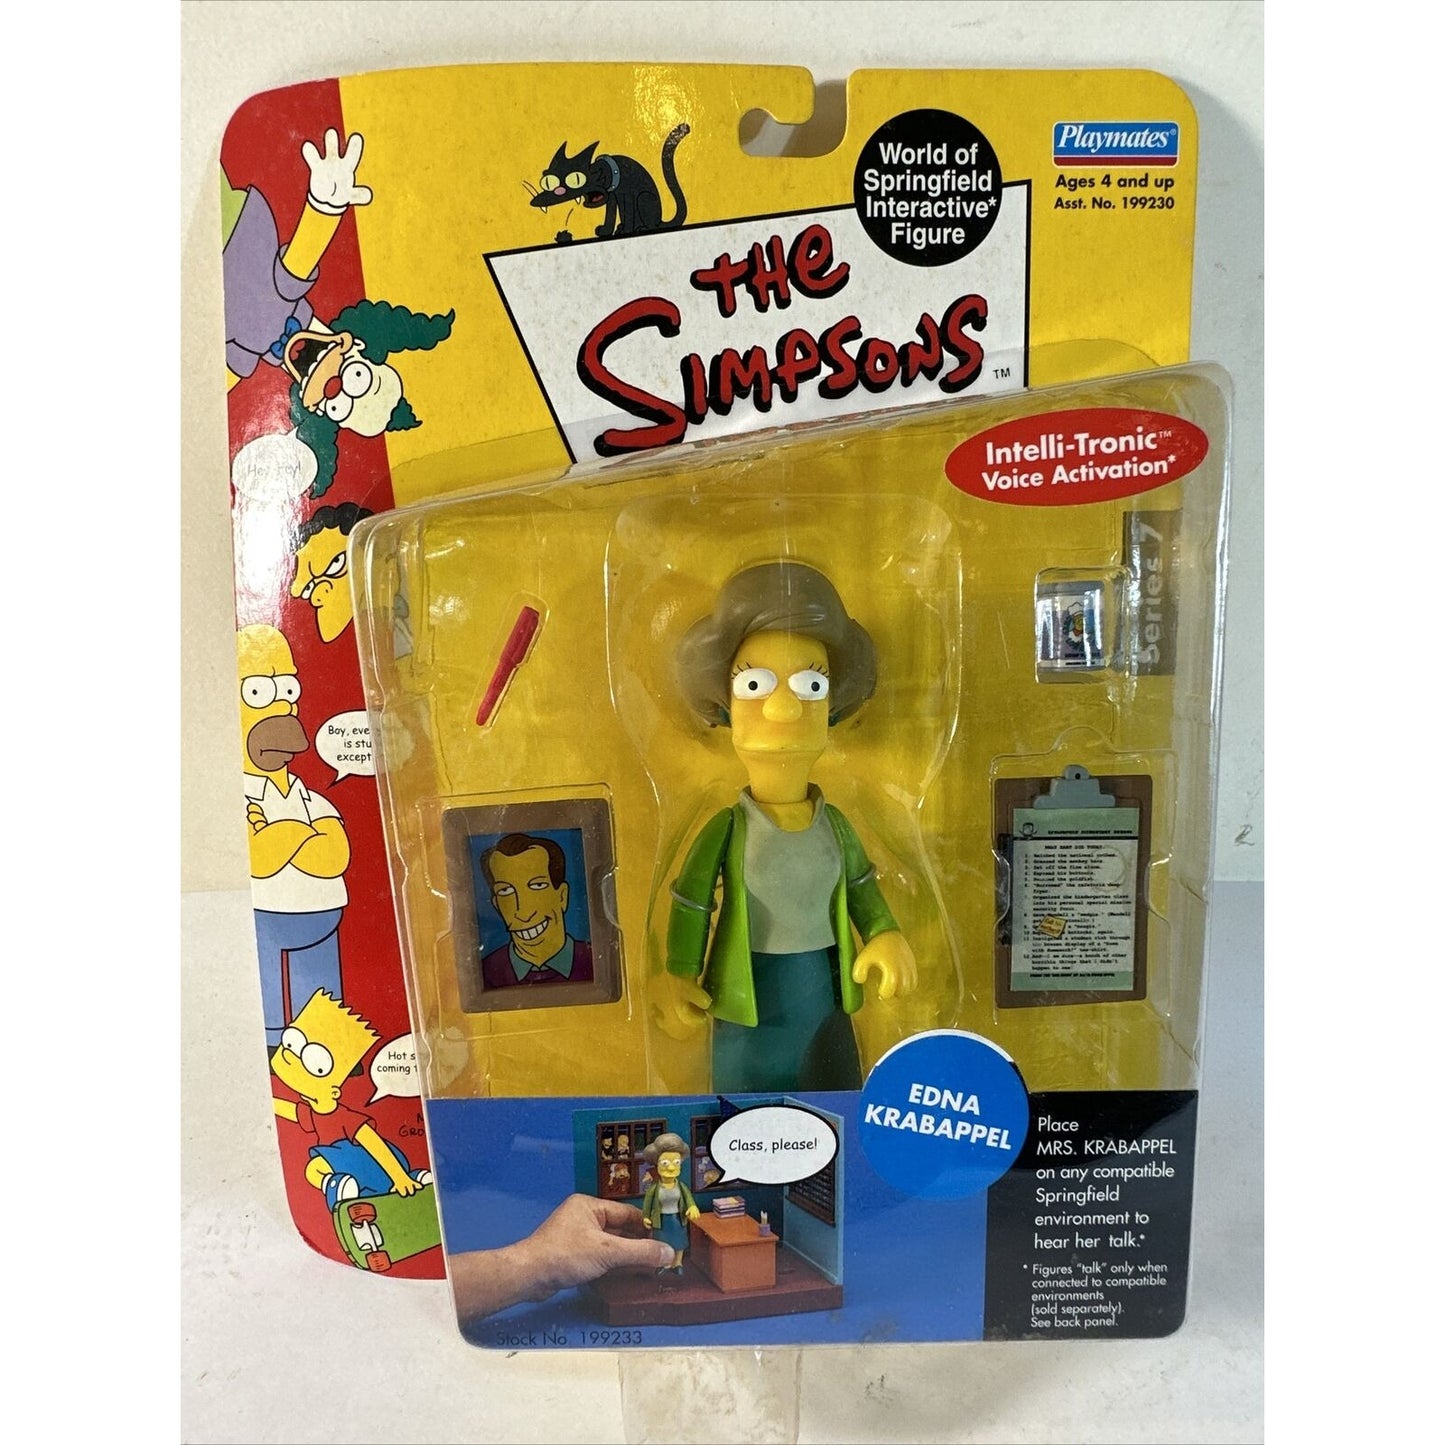 The Simpsons Edna Krabappel Series 7 World of Springfield Action Figure Playmate